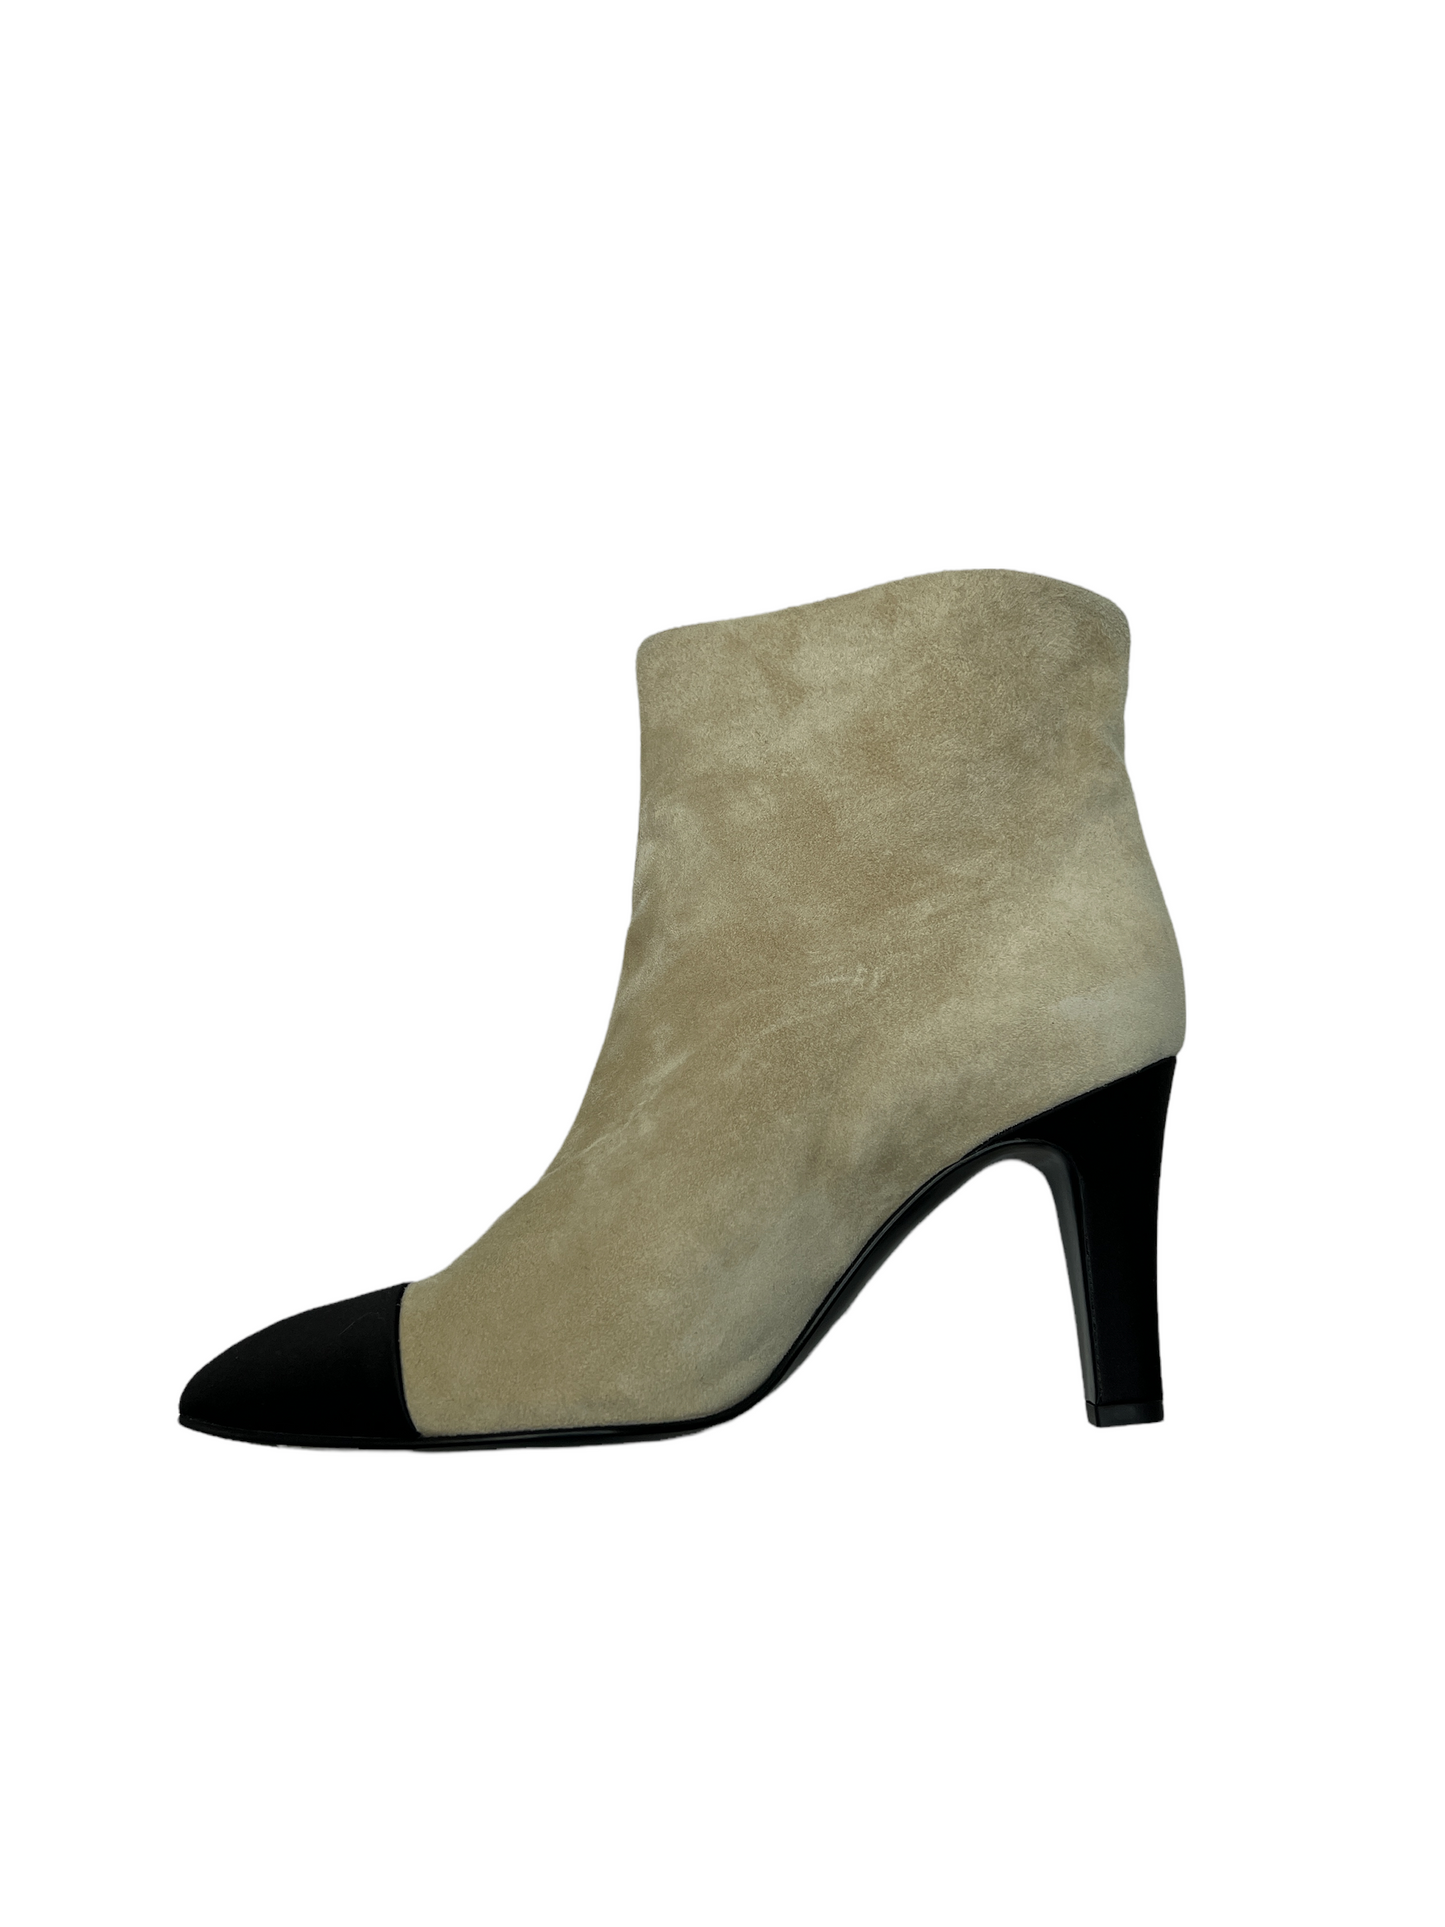 Suede Boots - 6.5